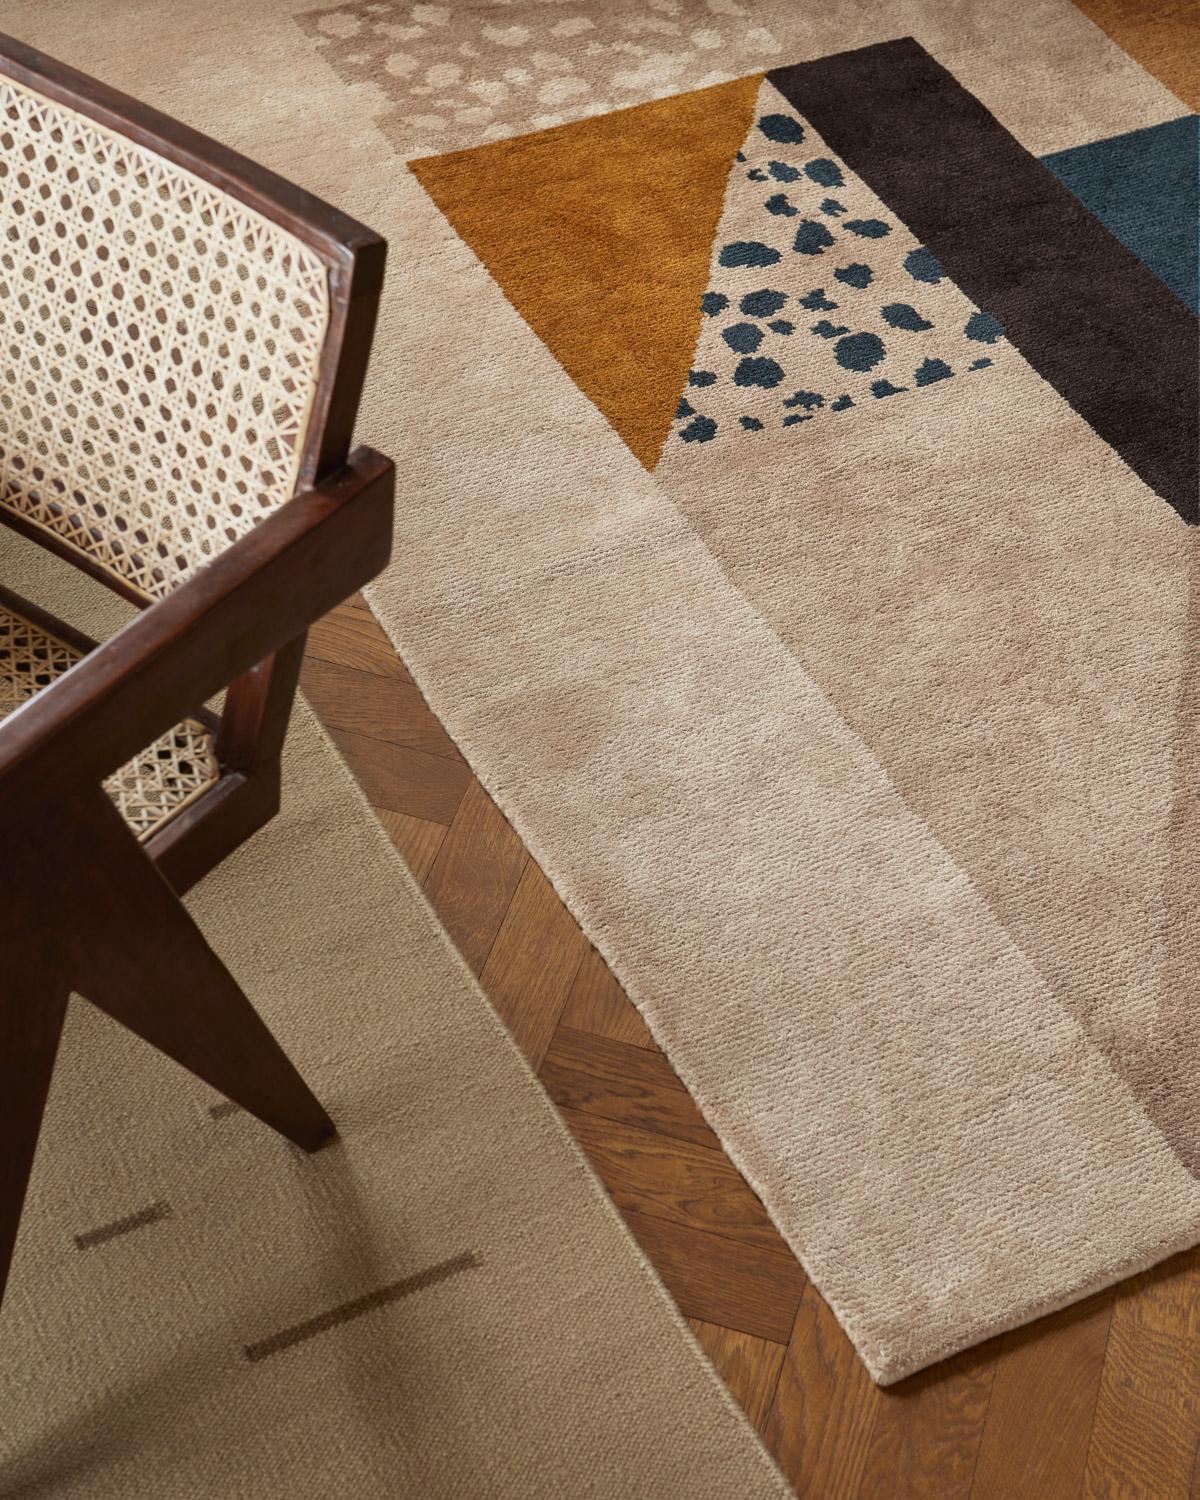 Inspired by the geometric architecture and rich colors of the Swedish Grace era. A significant Scandinavian design movement that drew inspiration from neoclassicism and art deco.

Much like the iconic architecture of that time, the new rugs play